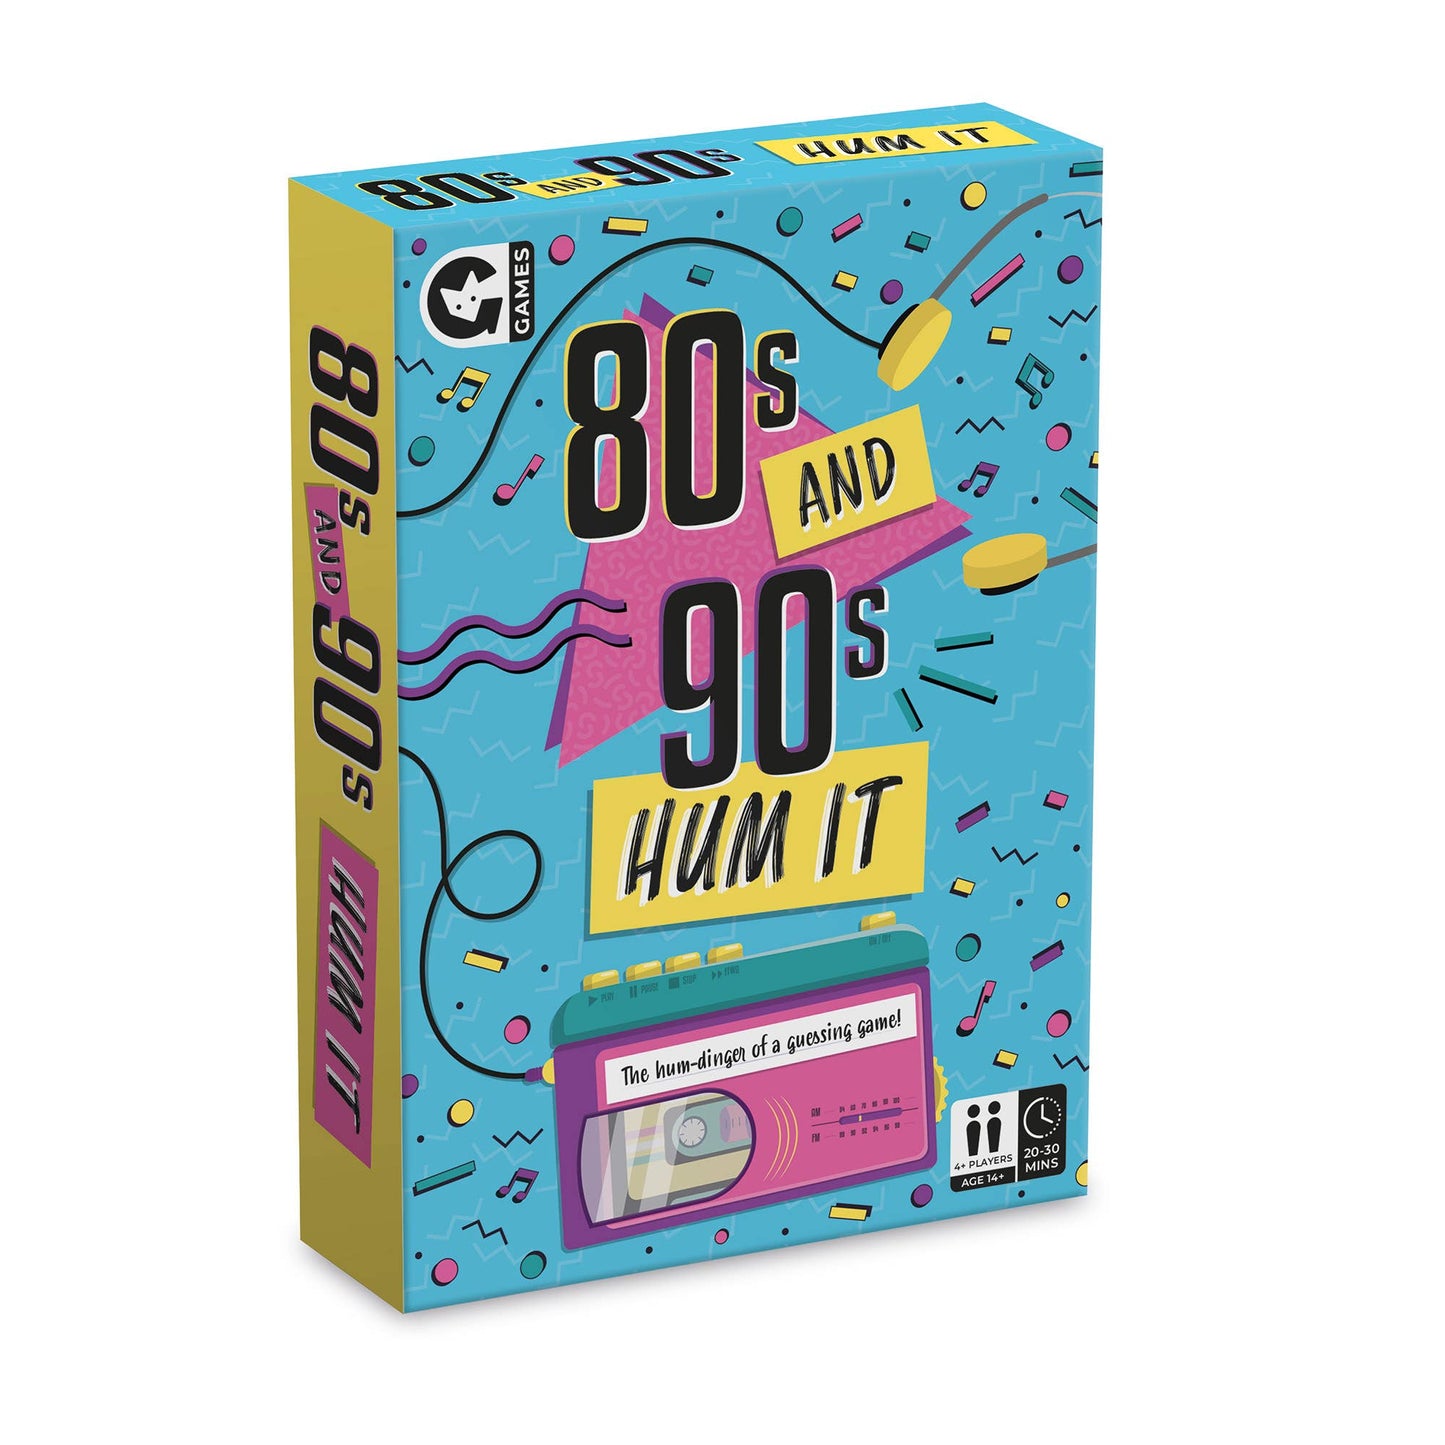 80s and 90s Hum It | The Hum-Dinger of a Guessing Game